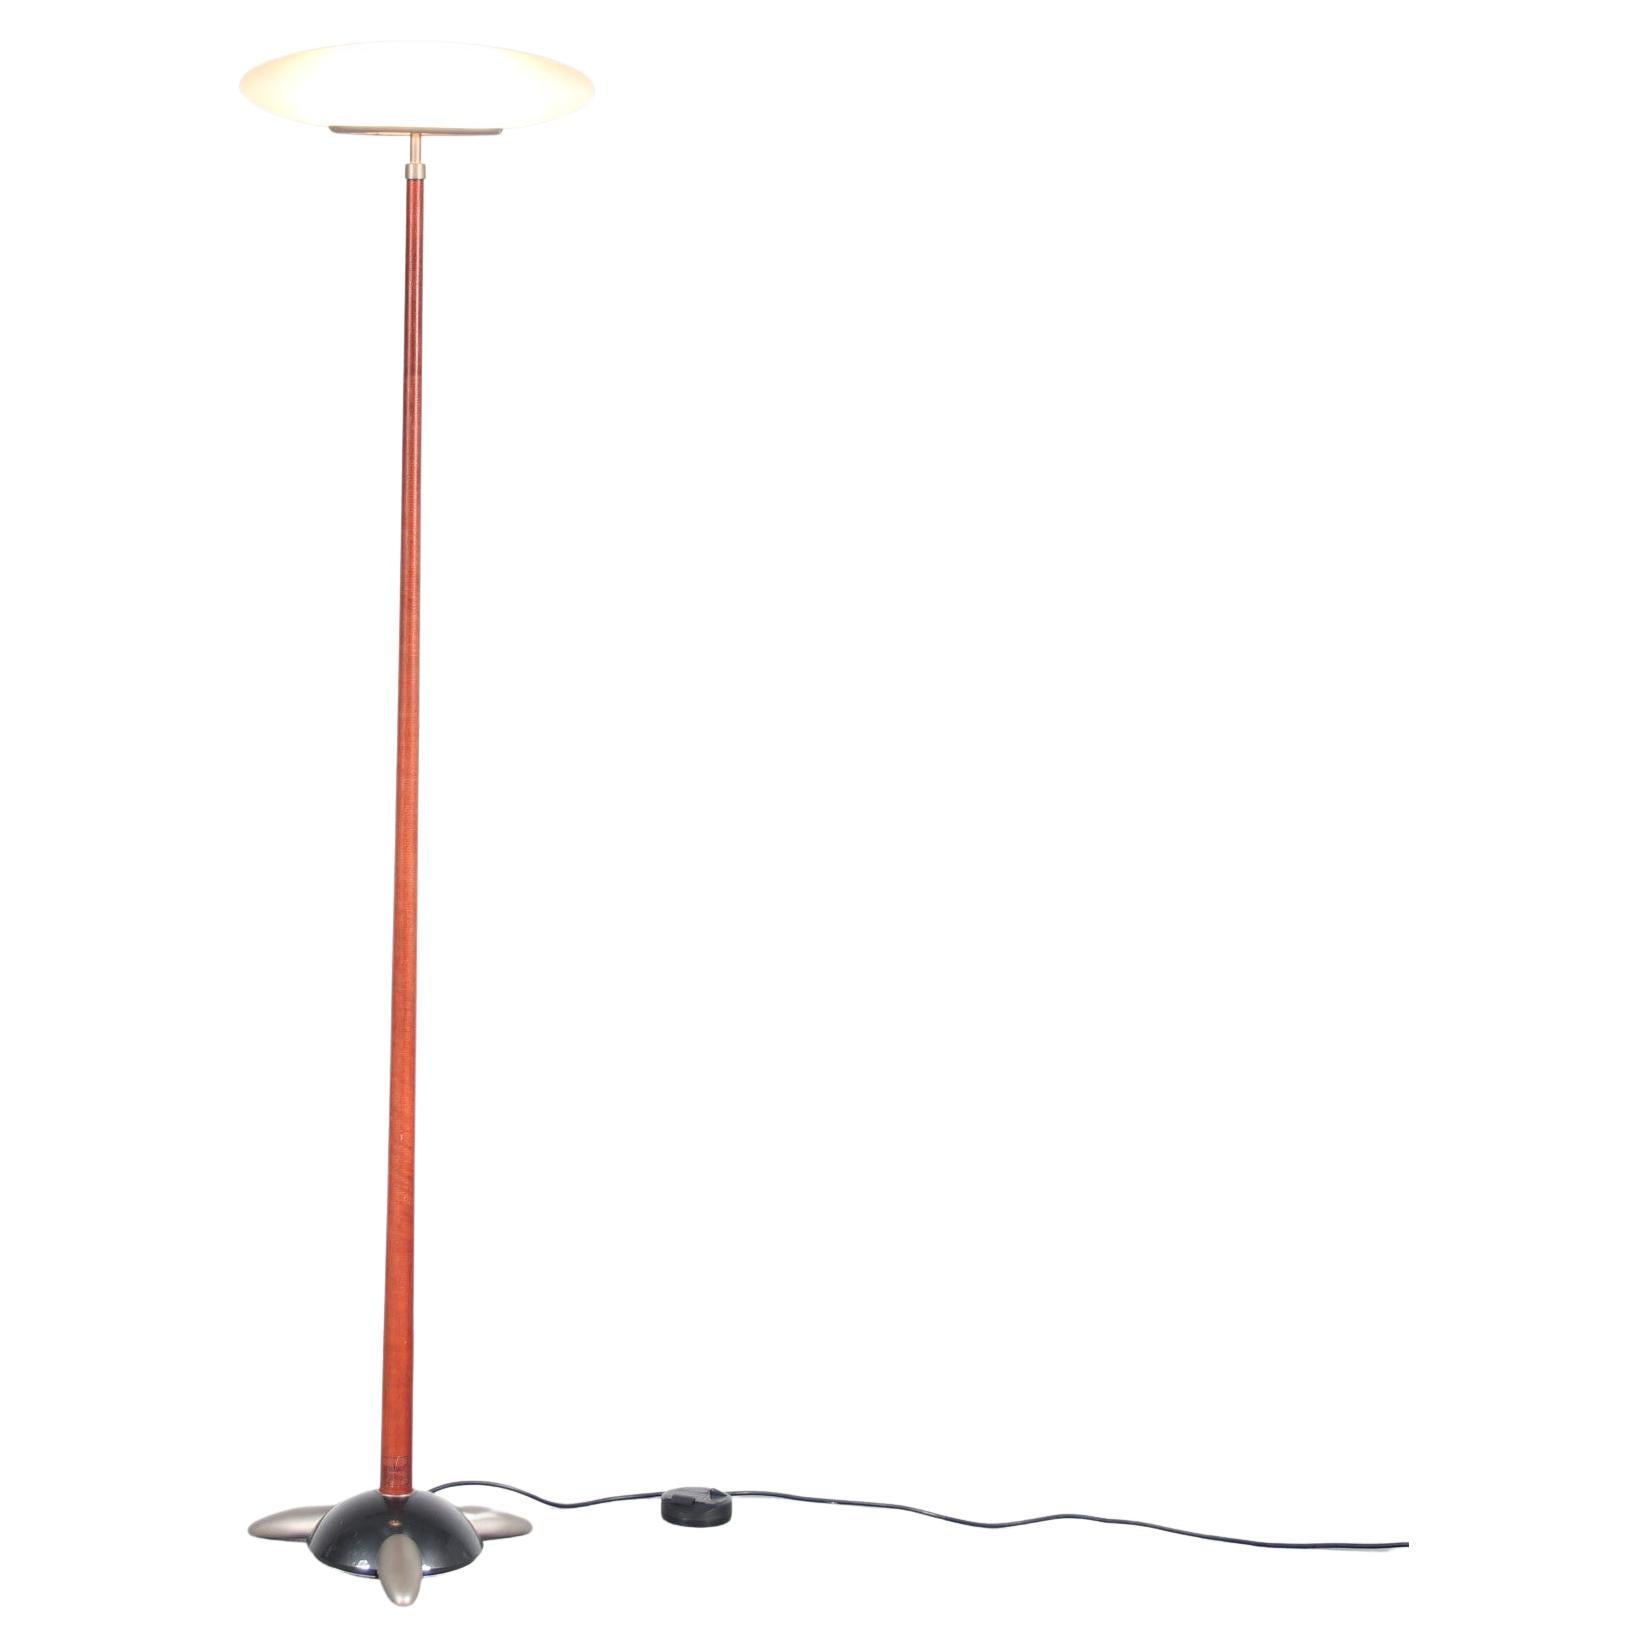 PAO Floor Lamp by Matteo Thun for Arteluce, Italy 1990 For Sale